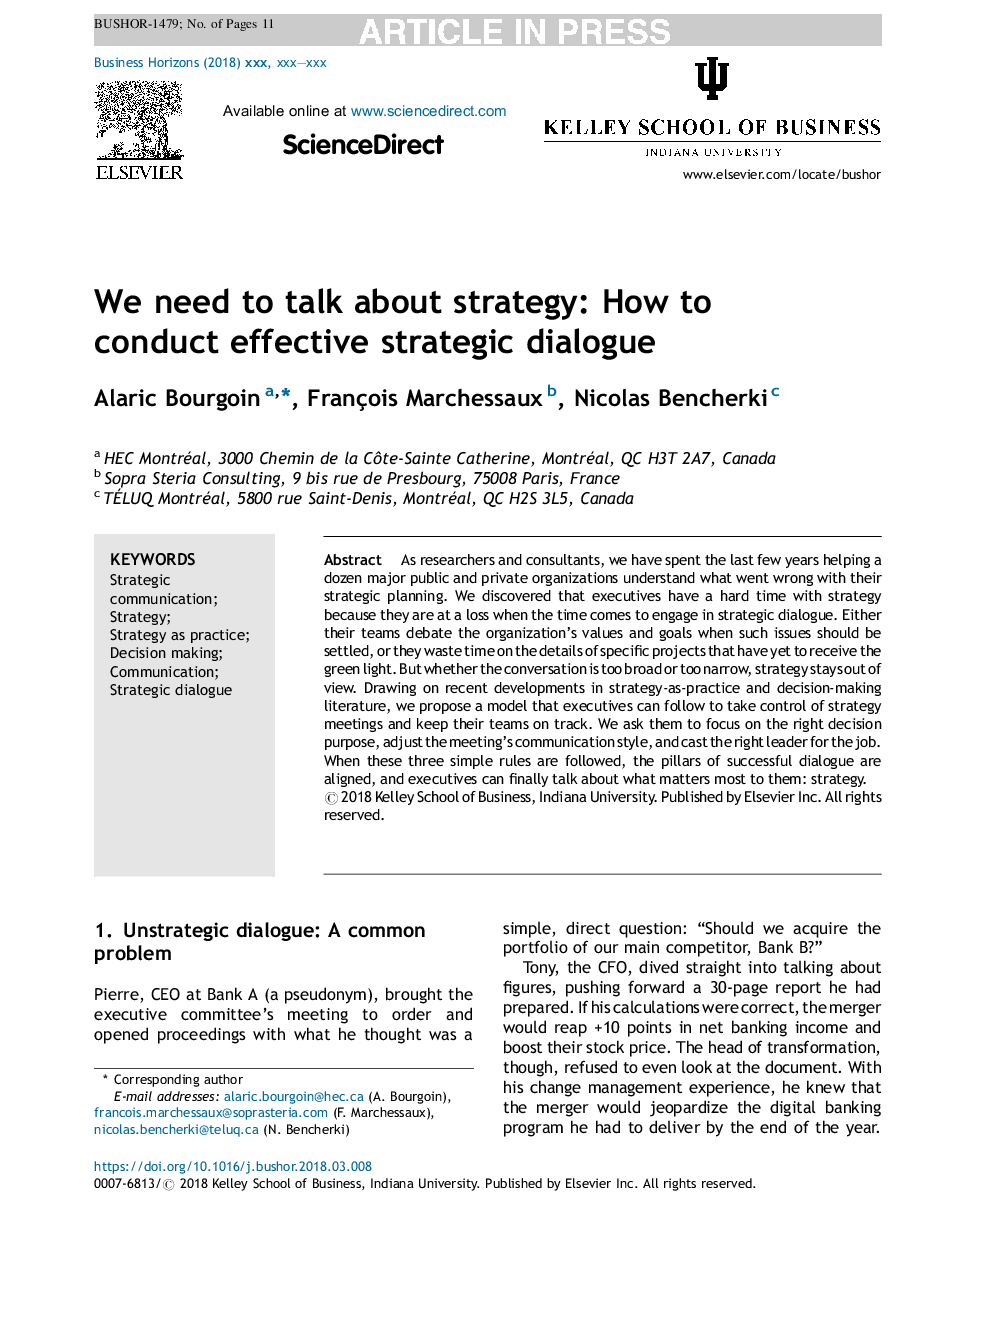 We need to talk about strategy: How to conduct effective strategic dialogue